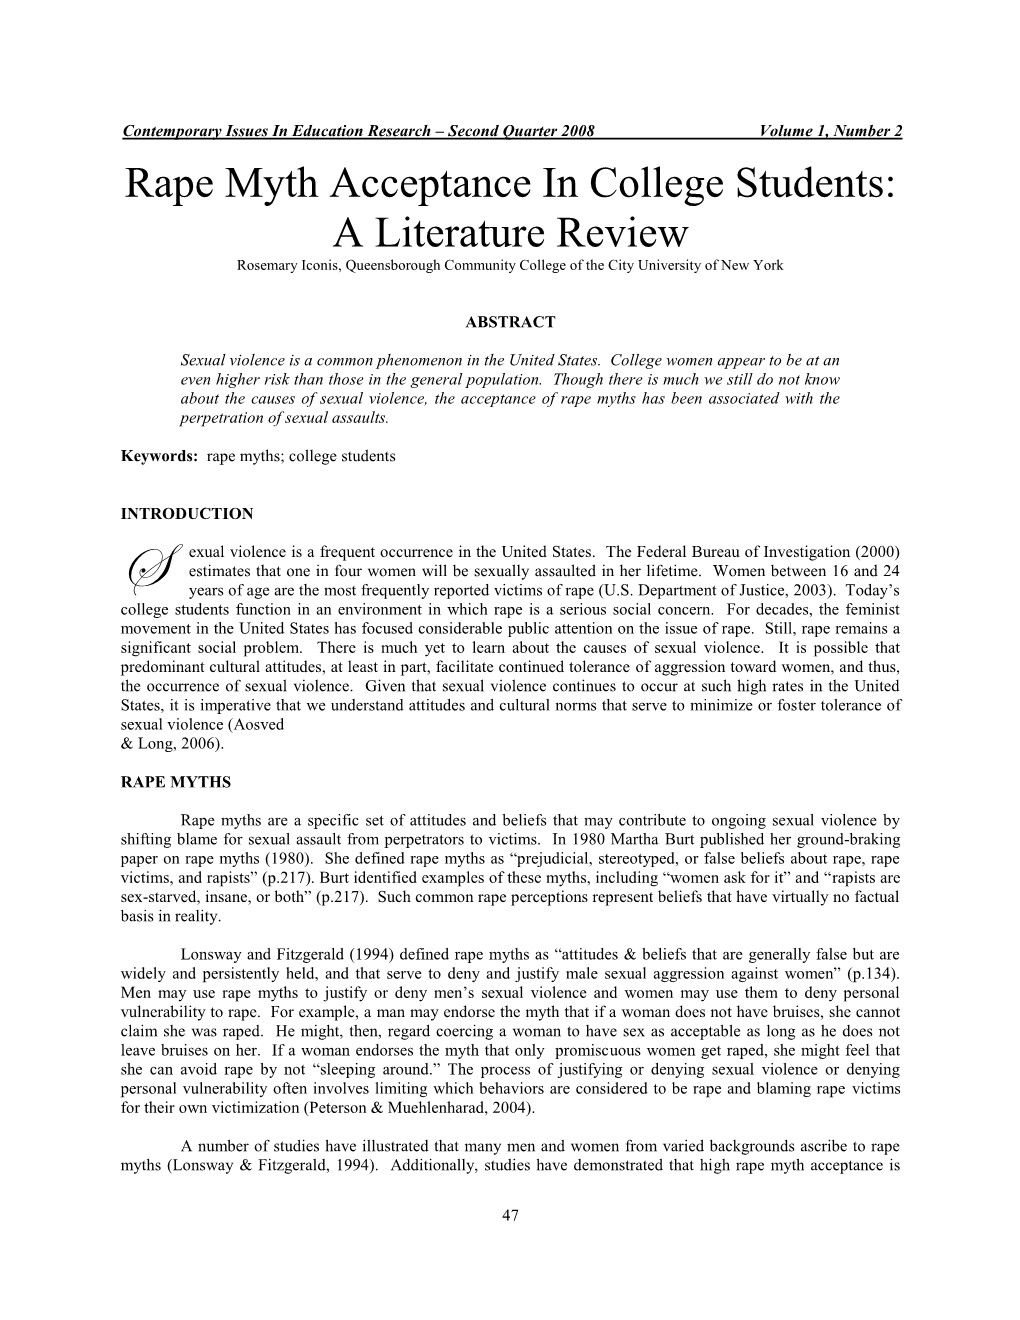 Rape Myth Acceptance in College Students: a Literature Review Rosemary Iconis, Queensborough Community College of the City University of New York